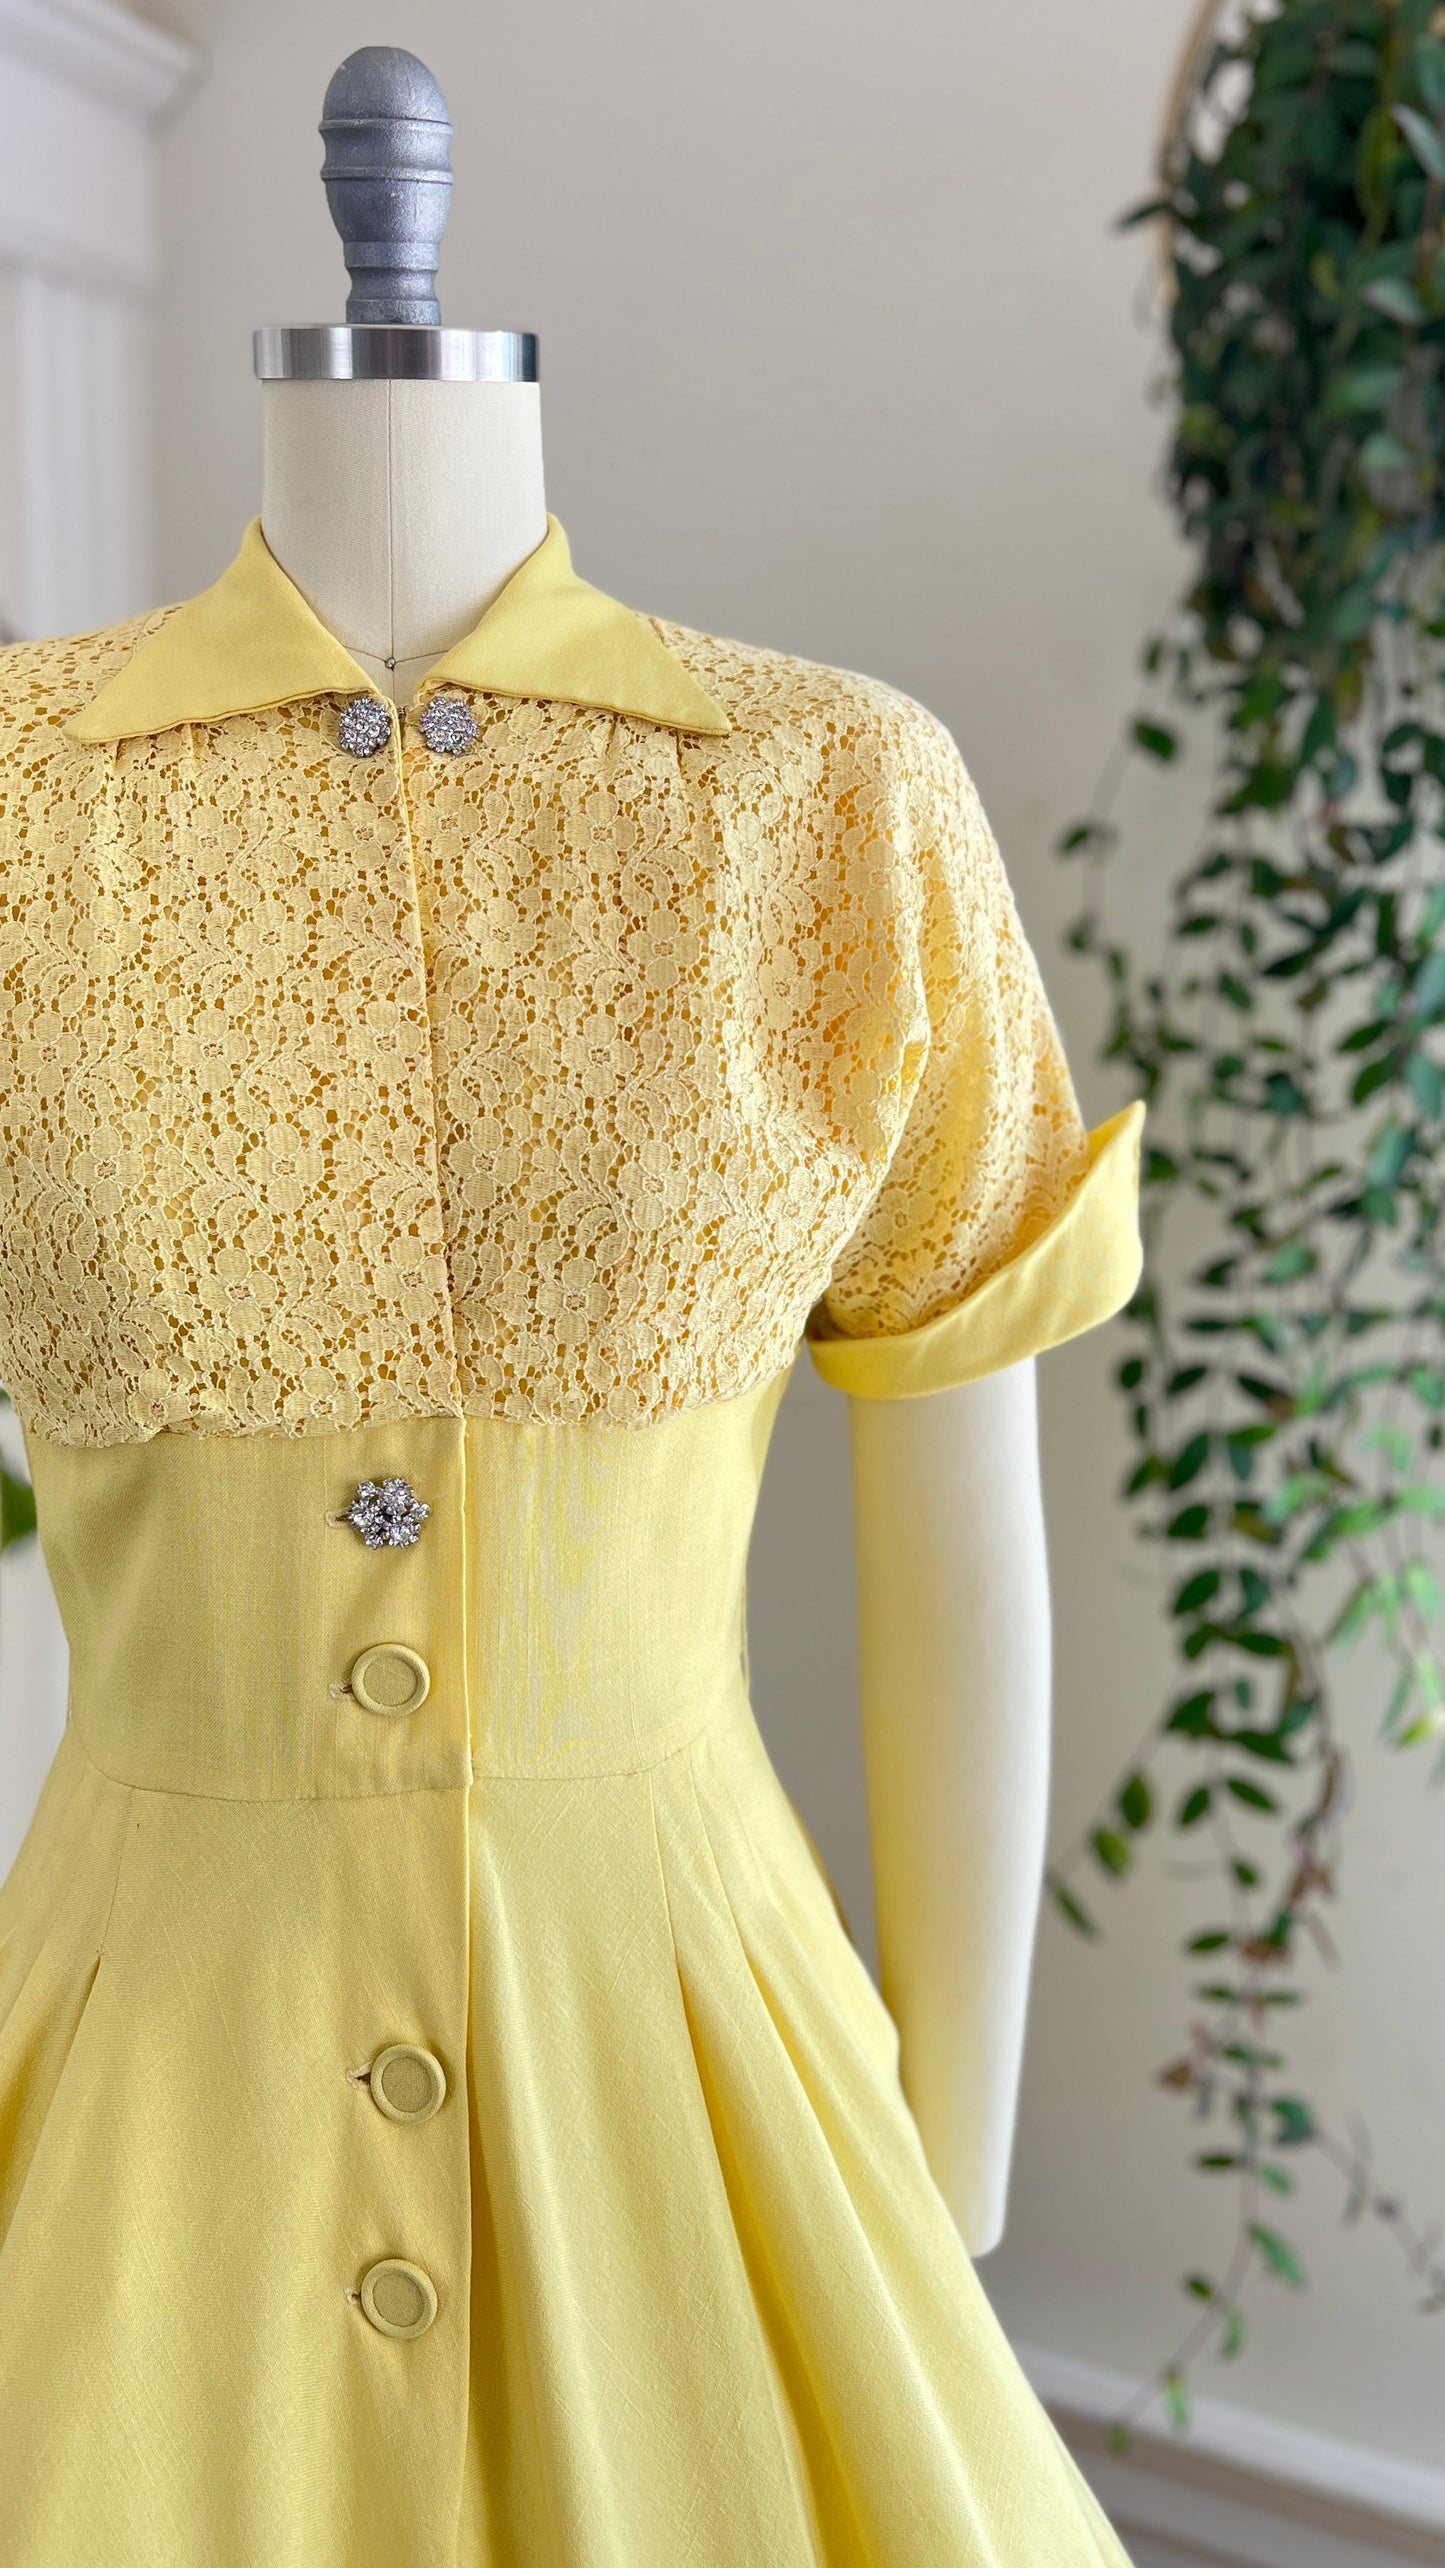 1950s Linen & Lace Dress | x-small/small